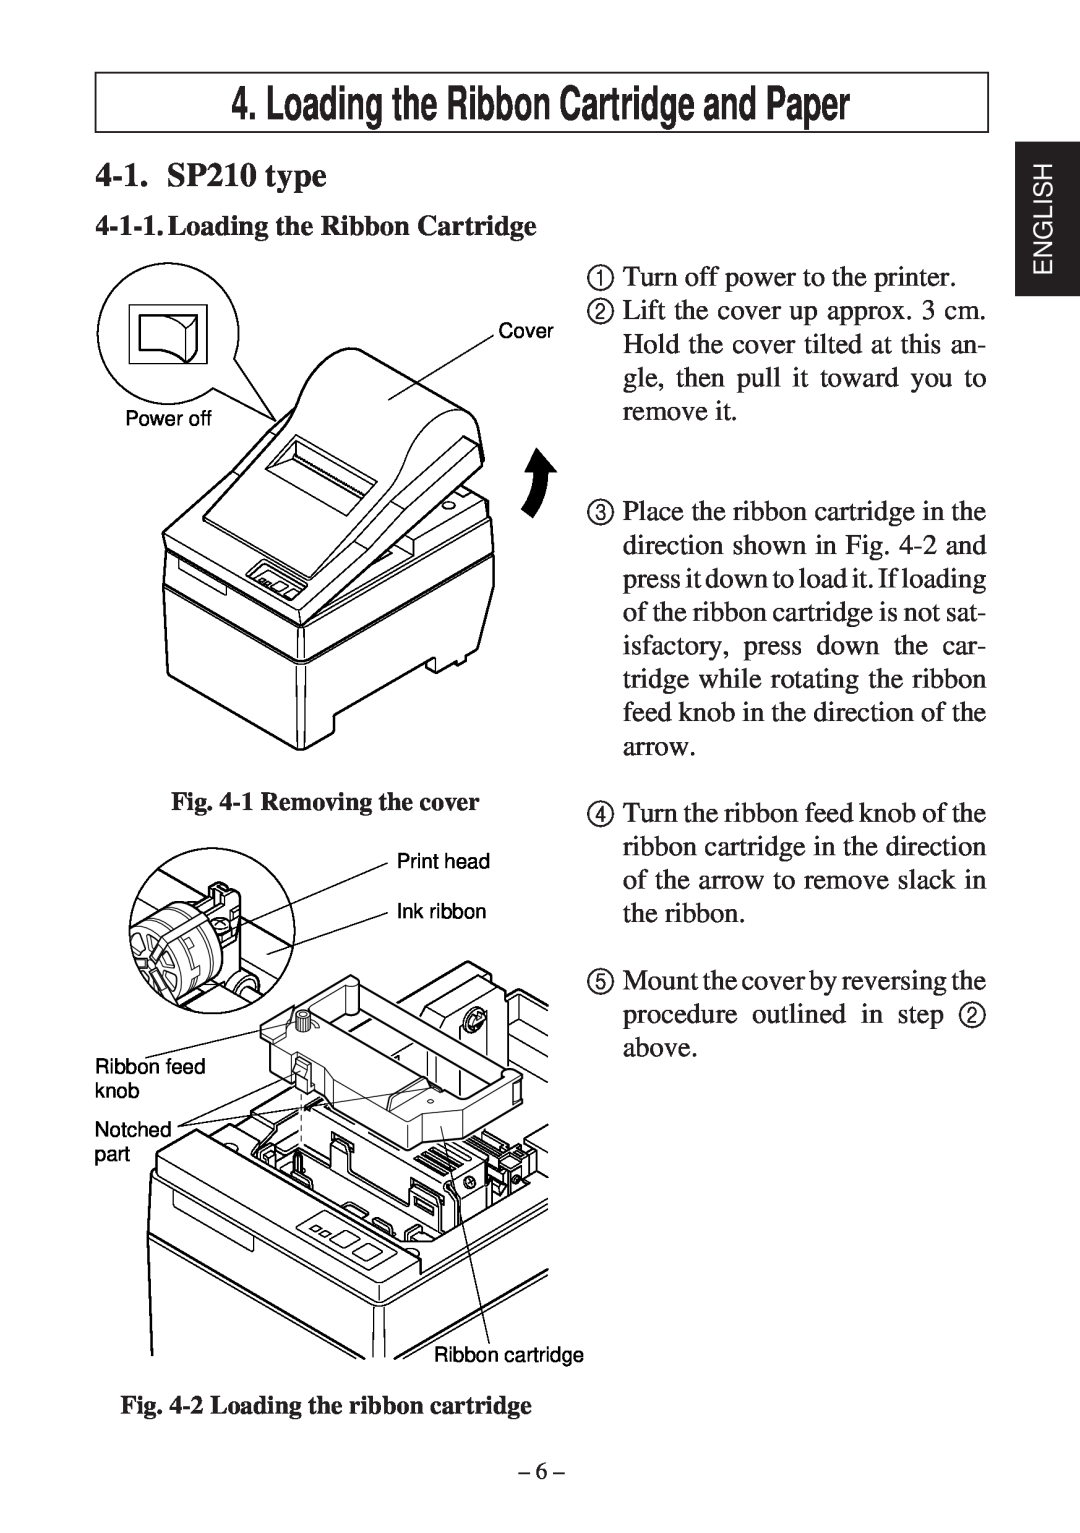 Star Micronics SP200F user manual Loading the Ribbon Cartridge and Paper, 4-1. SP210 type 